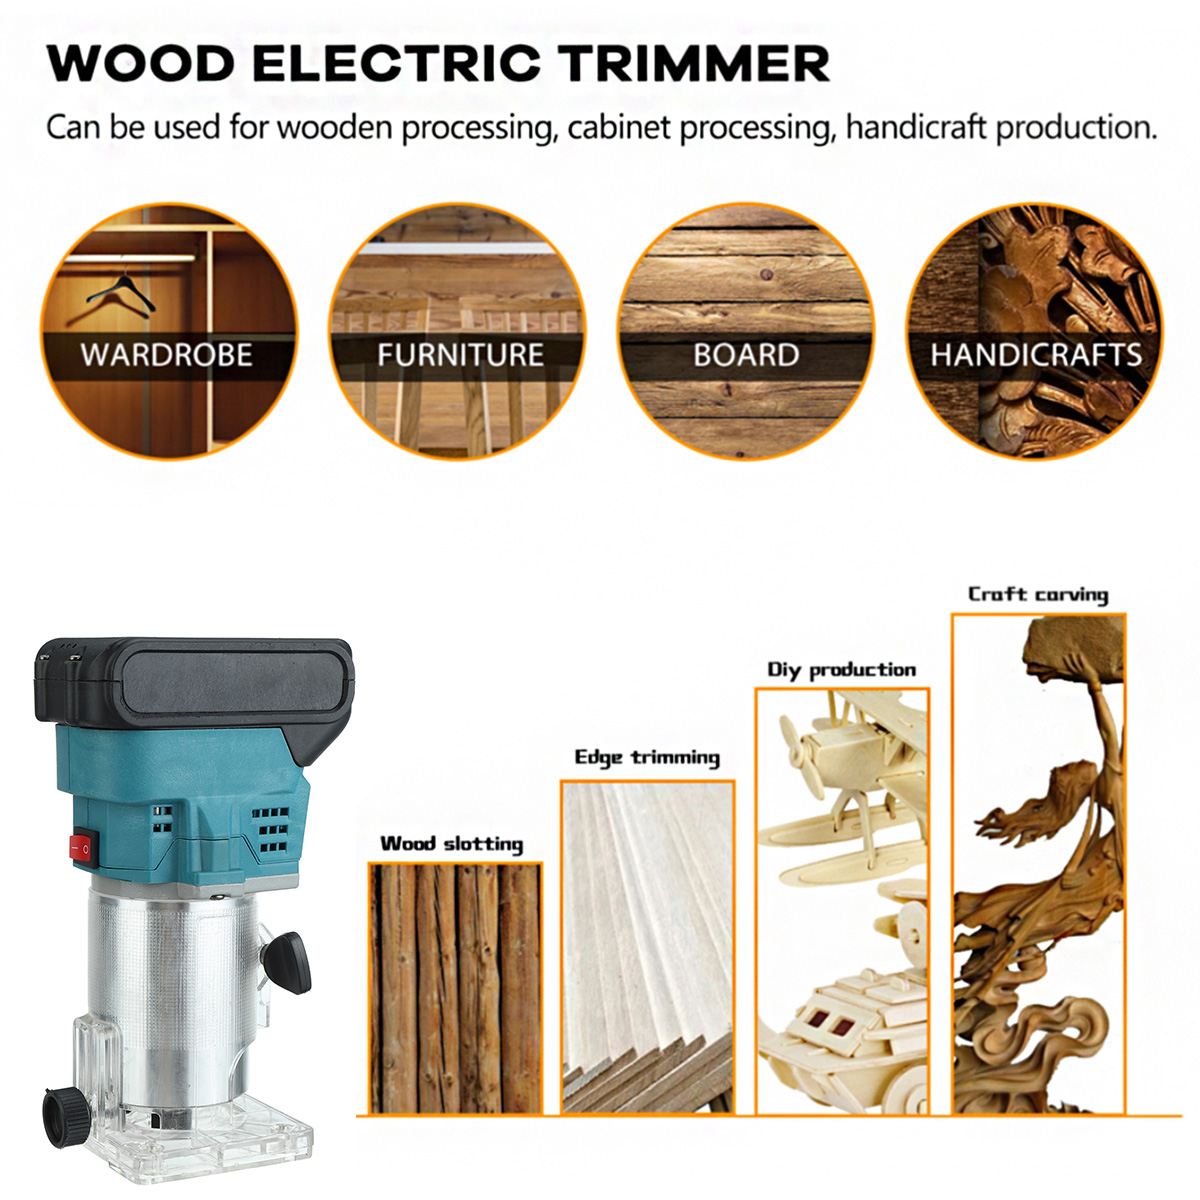 635mm-Cordless-Electric-Trimmer-Compact-Palm-Router-Corded-Woodworking-Trimming-Edge-Guide-Wood-W-12-1854950-3